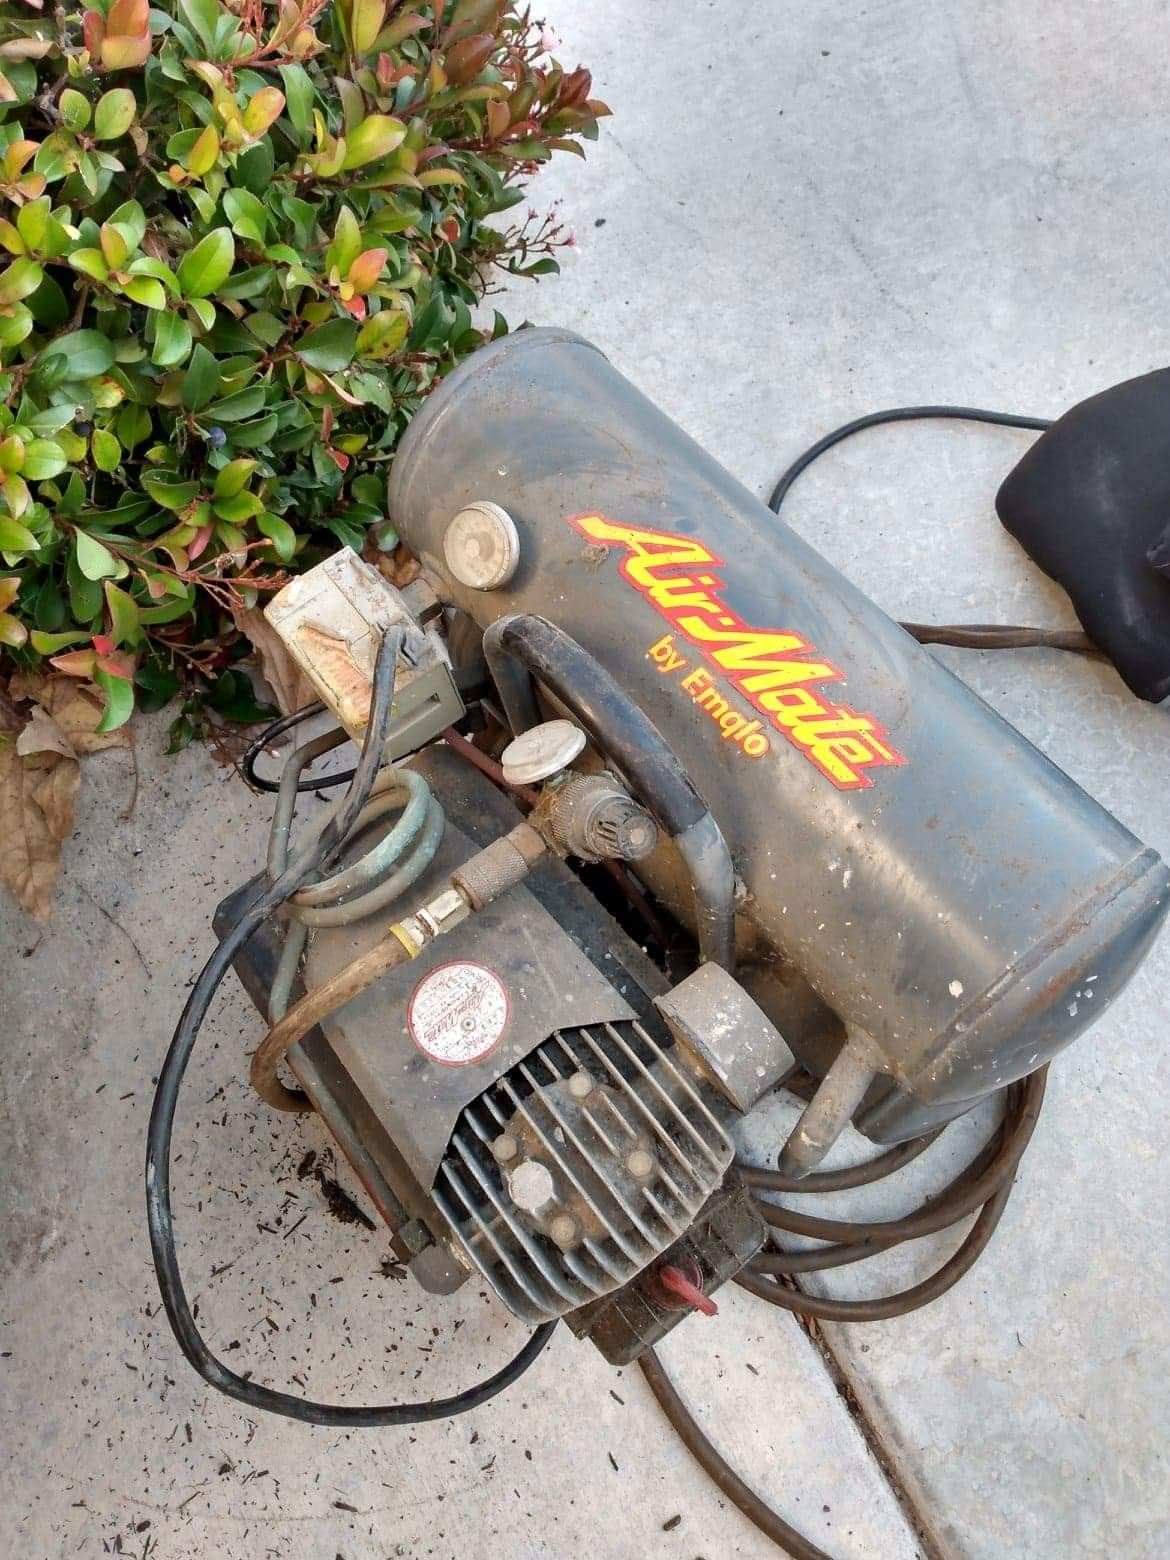 Used Airmate by Emglo Air Compressor. In working condition